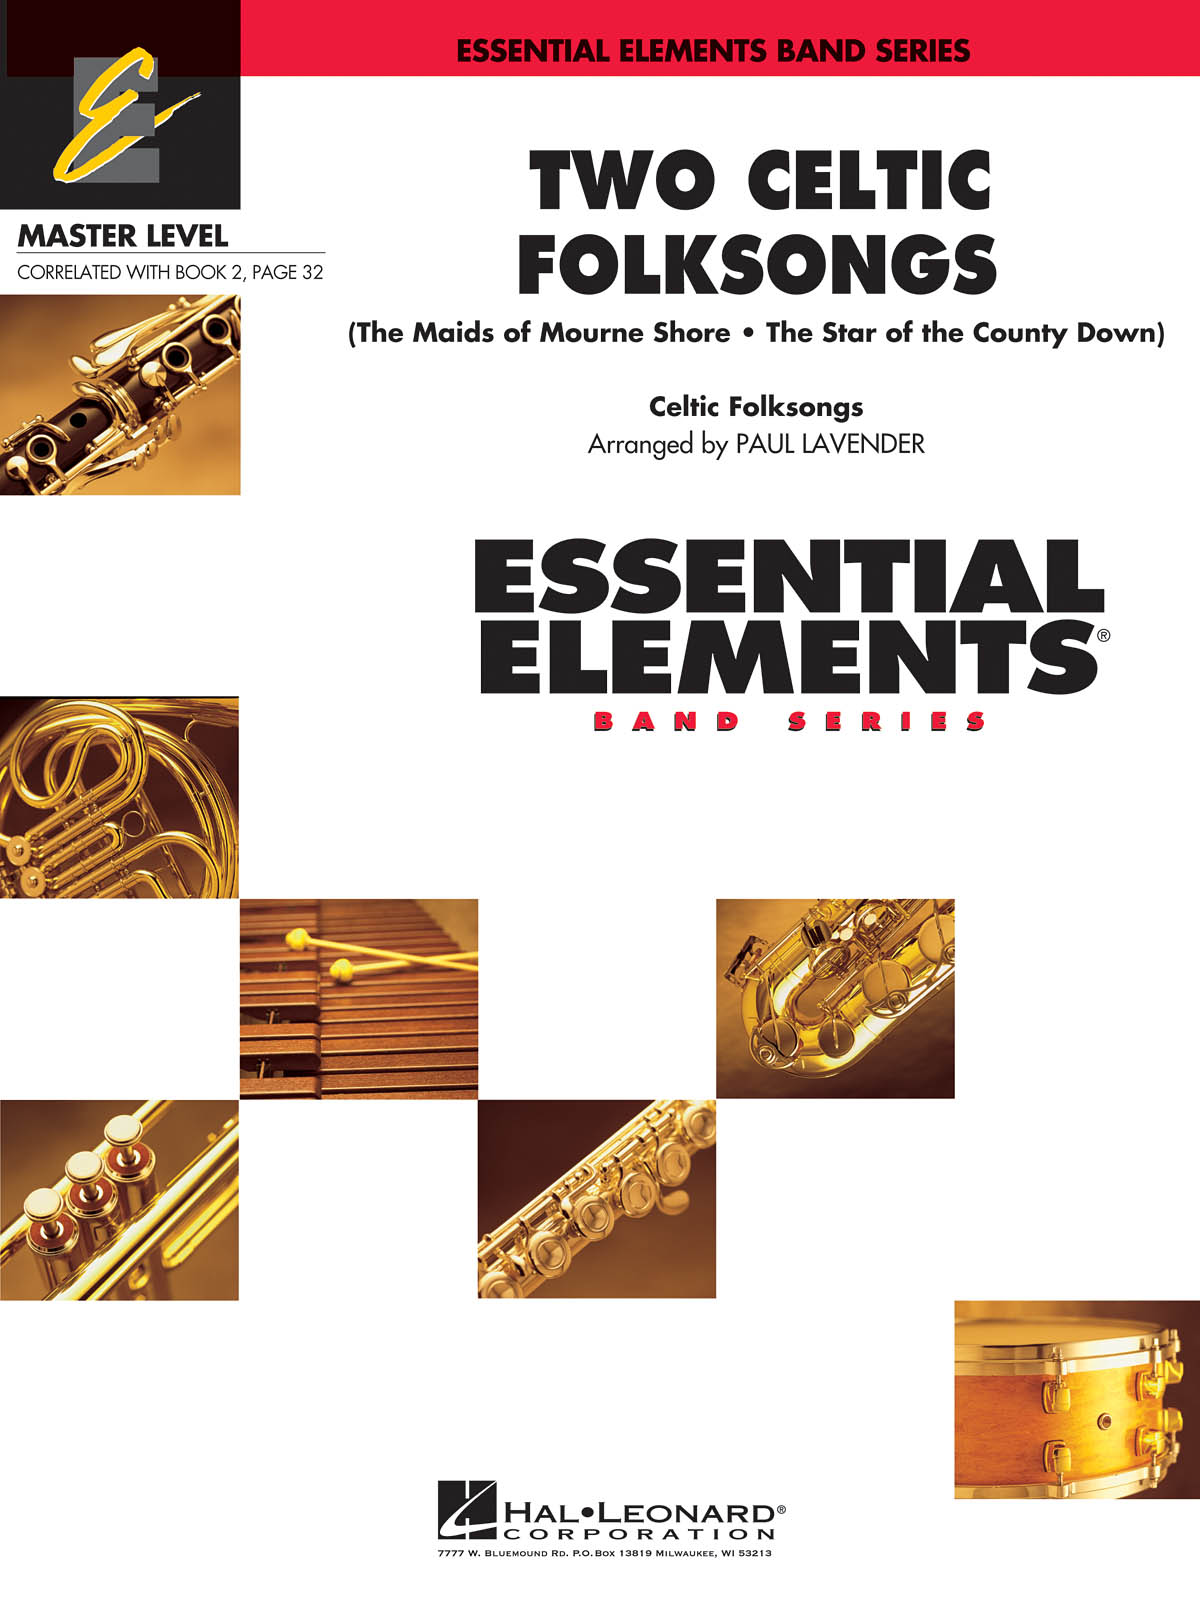 Two Celtic Folksongs - Essential Elements - noty pro orchestr